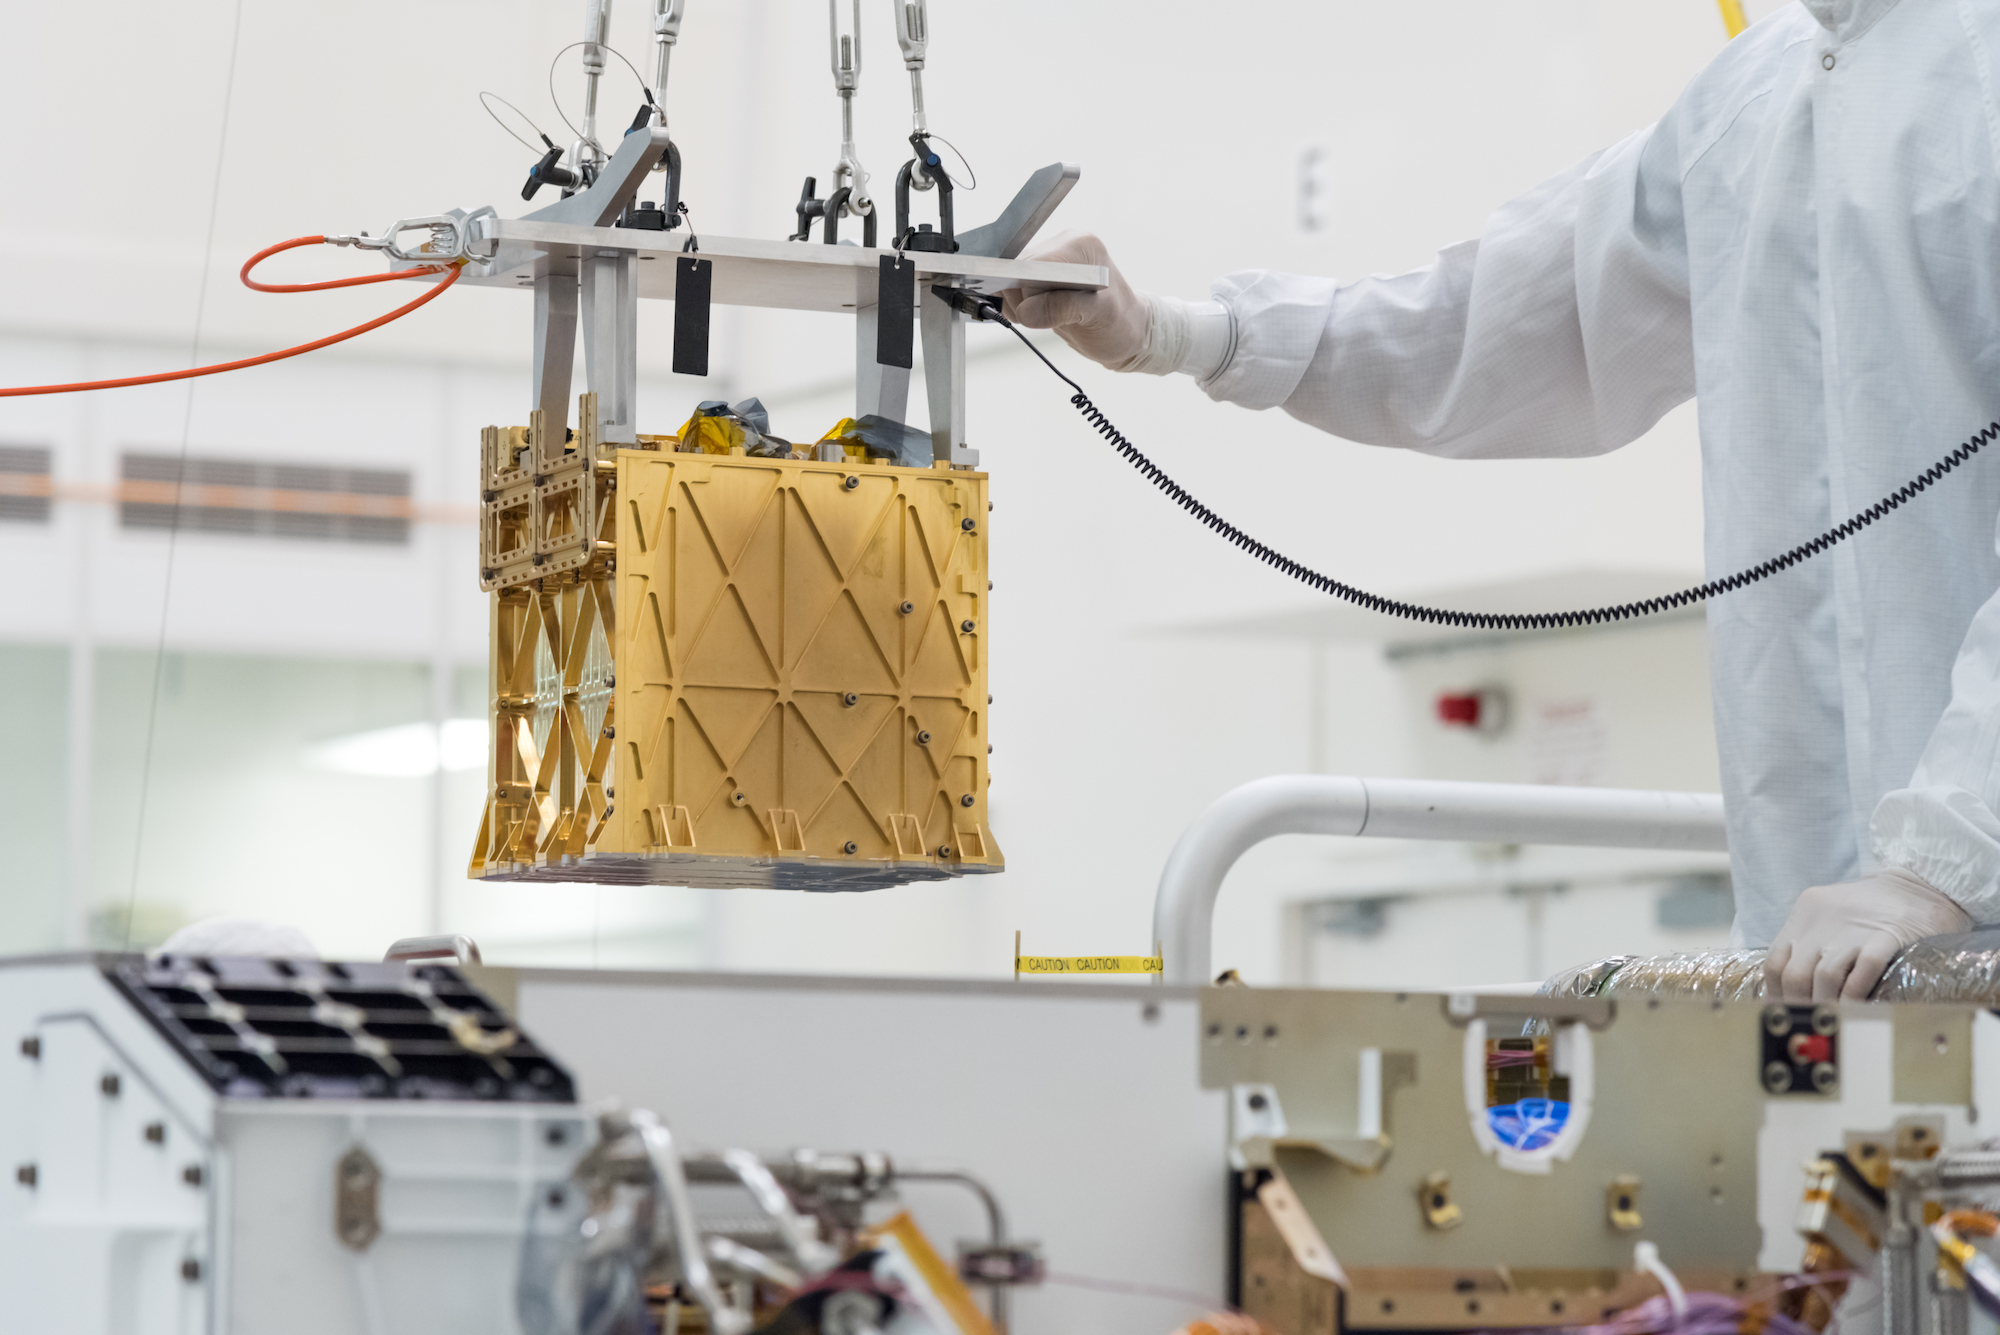 Technicians in the clean room are carefully lowering the Mars Oxygen In-Situ Resource Utilization Experiment (MOXIE) instrument into the belly of the Perseverance rover.